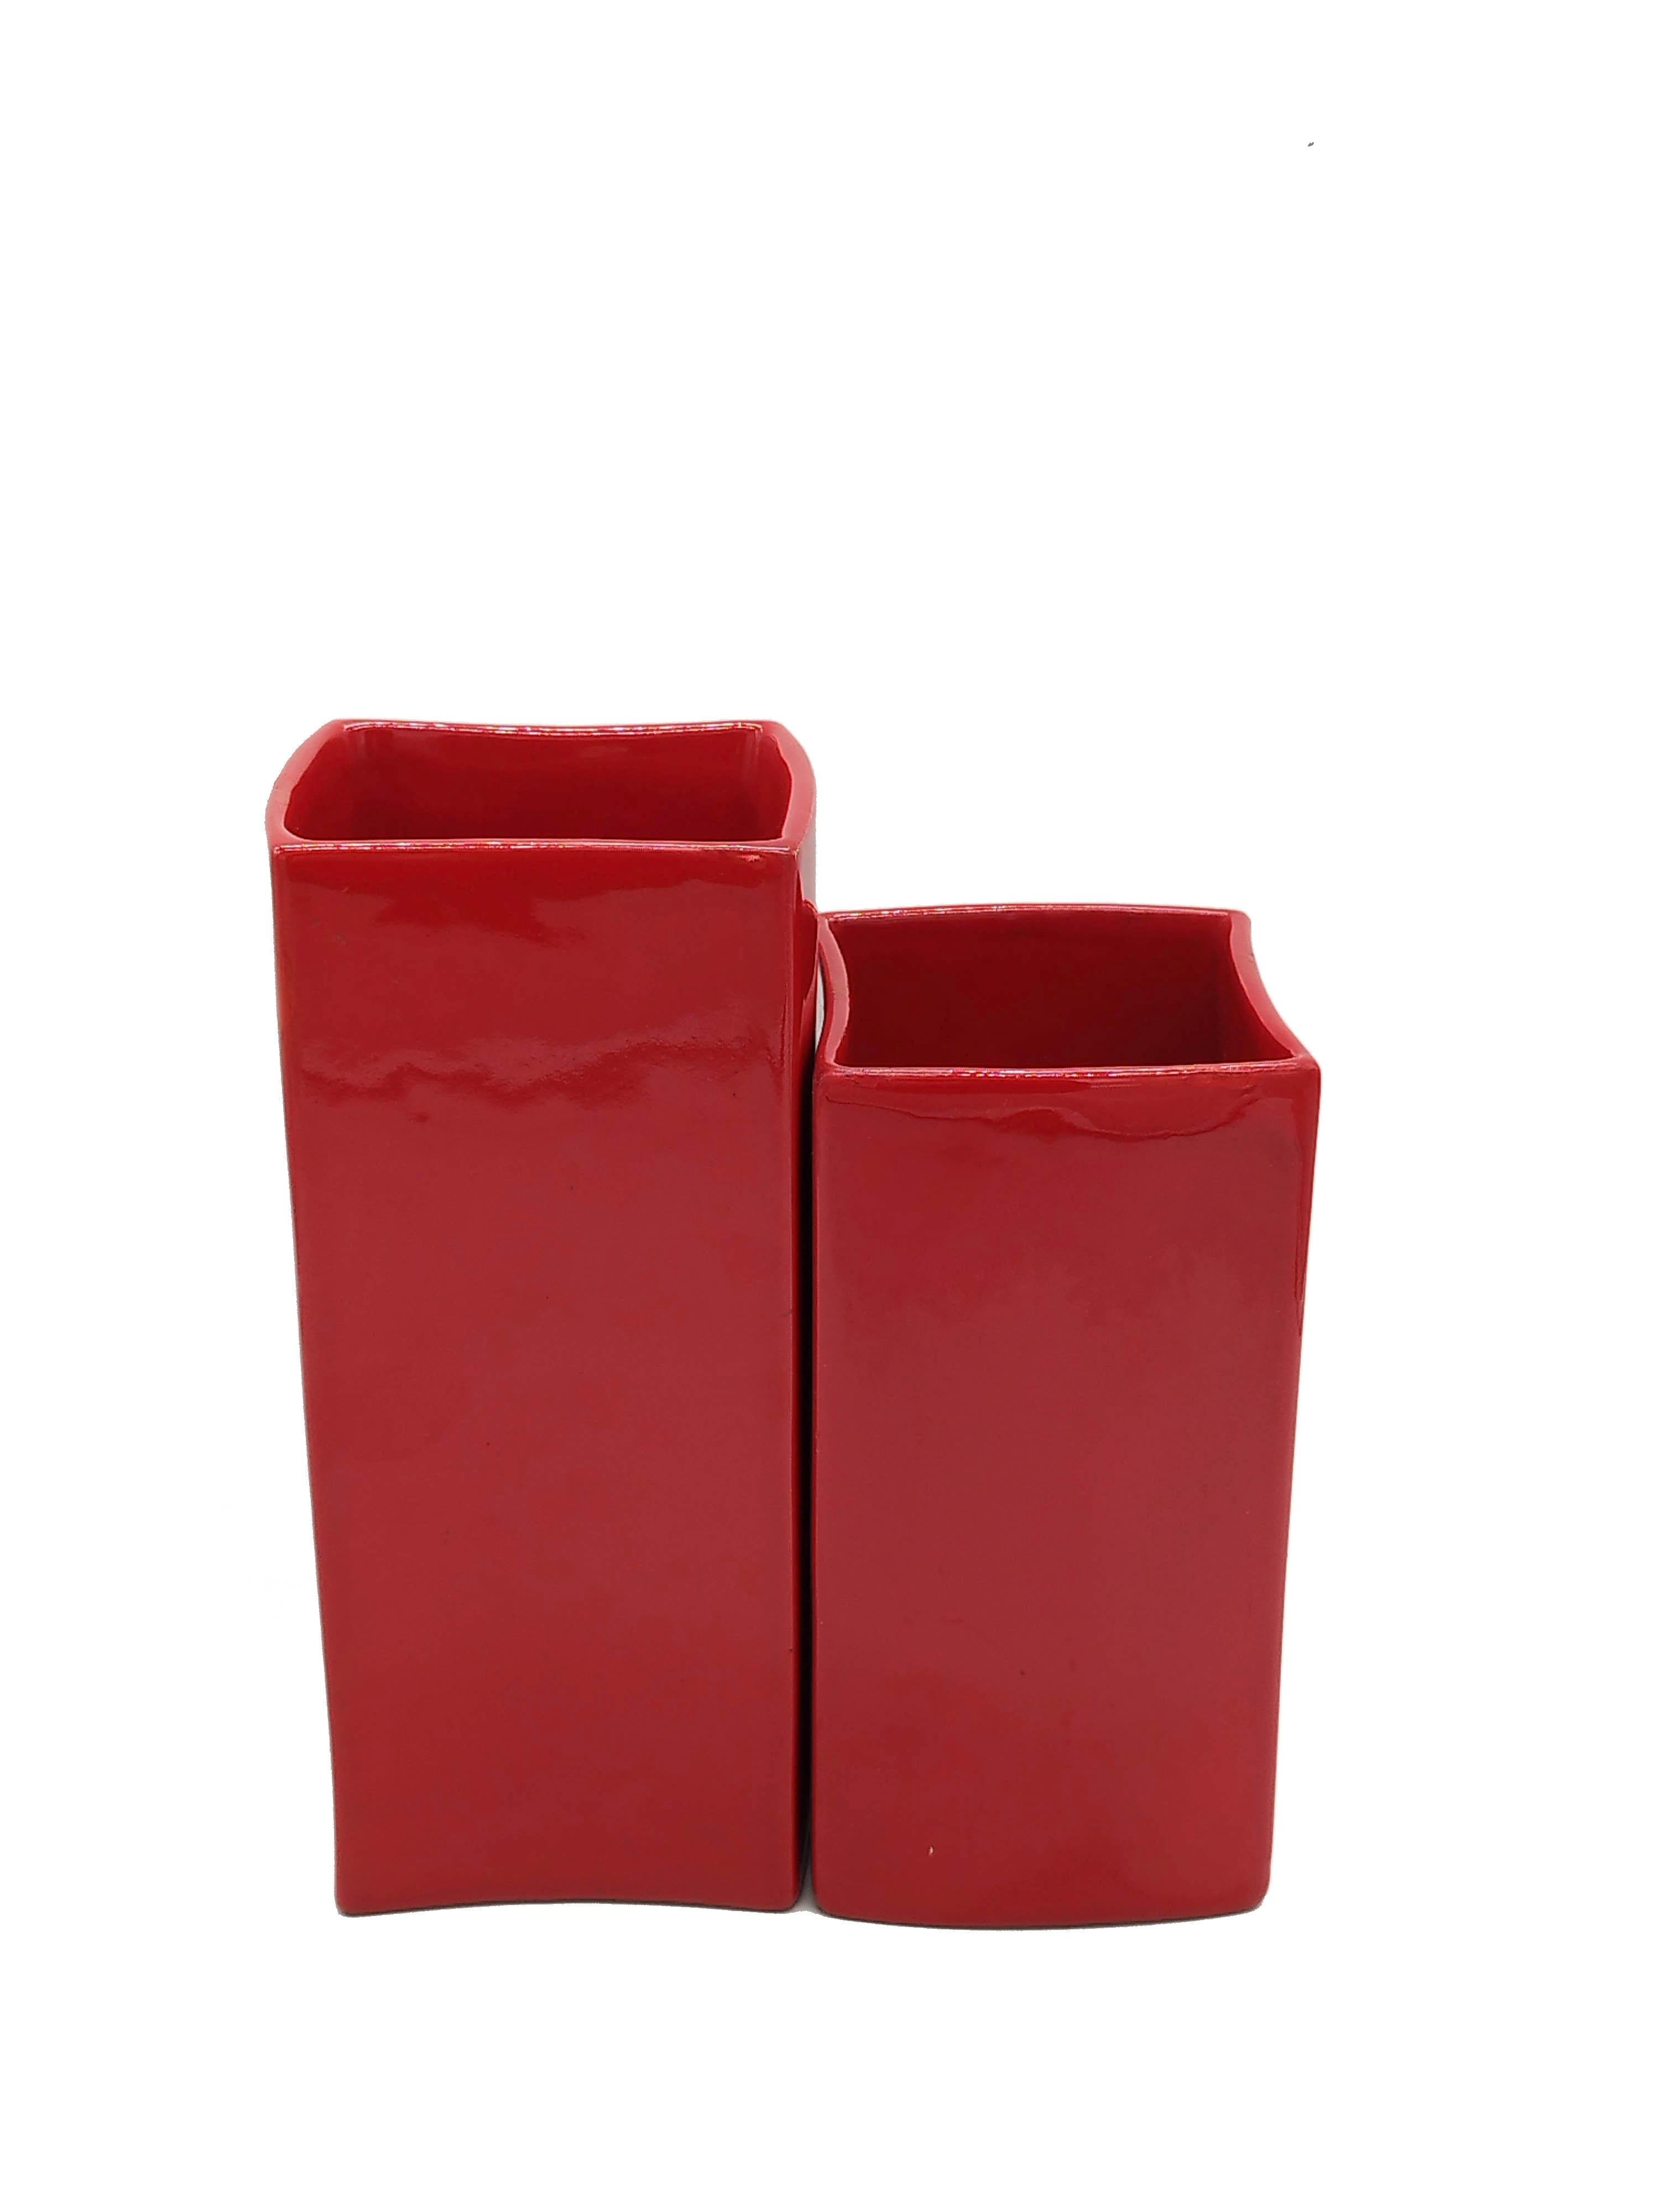 Late 20th Century Franco Bettonica for Gabbianelli Set of Two Red Ceramic Vases, Italy 1970s